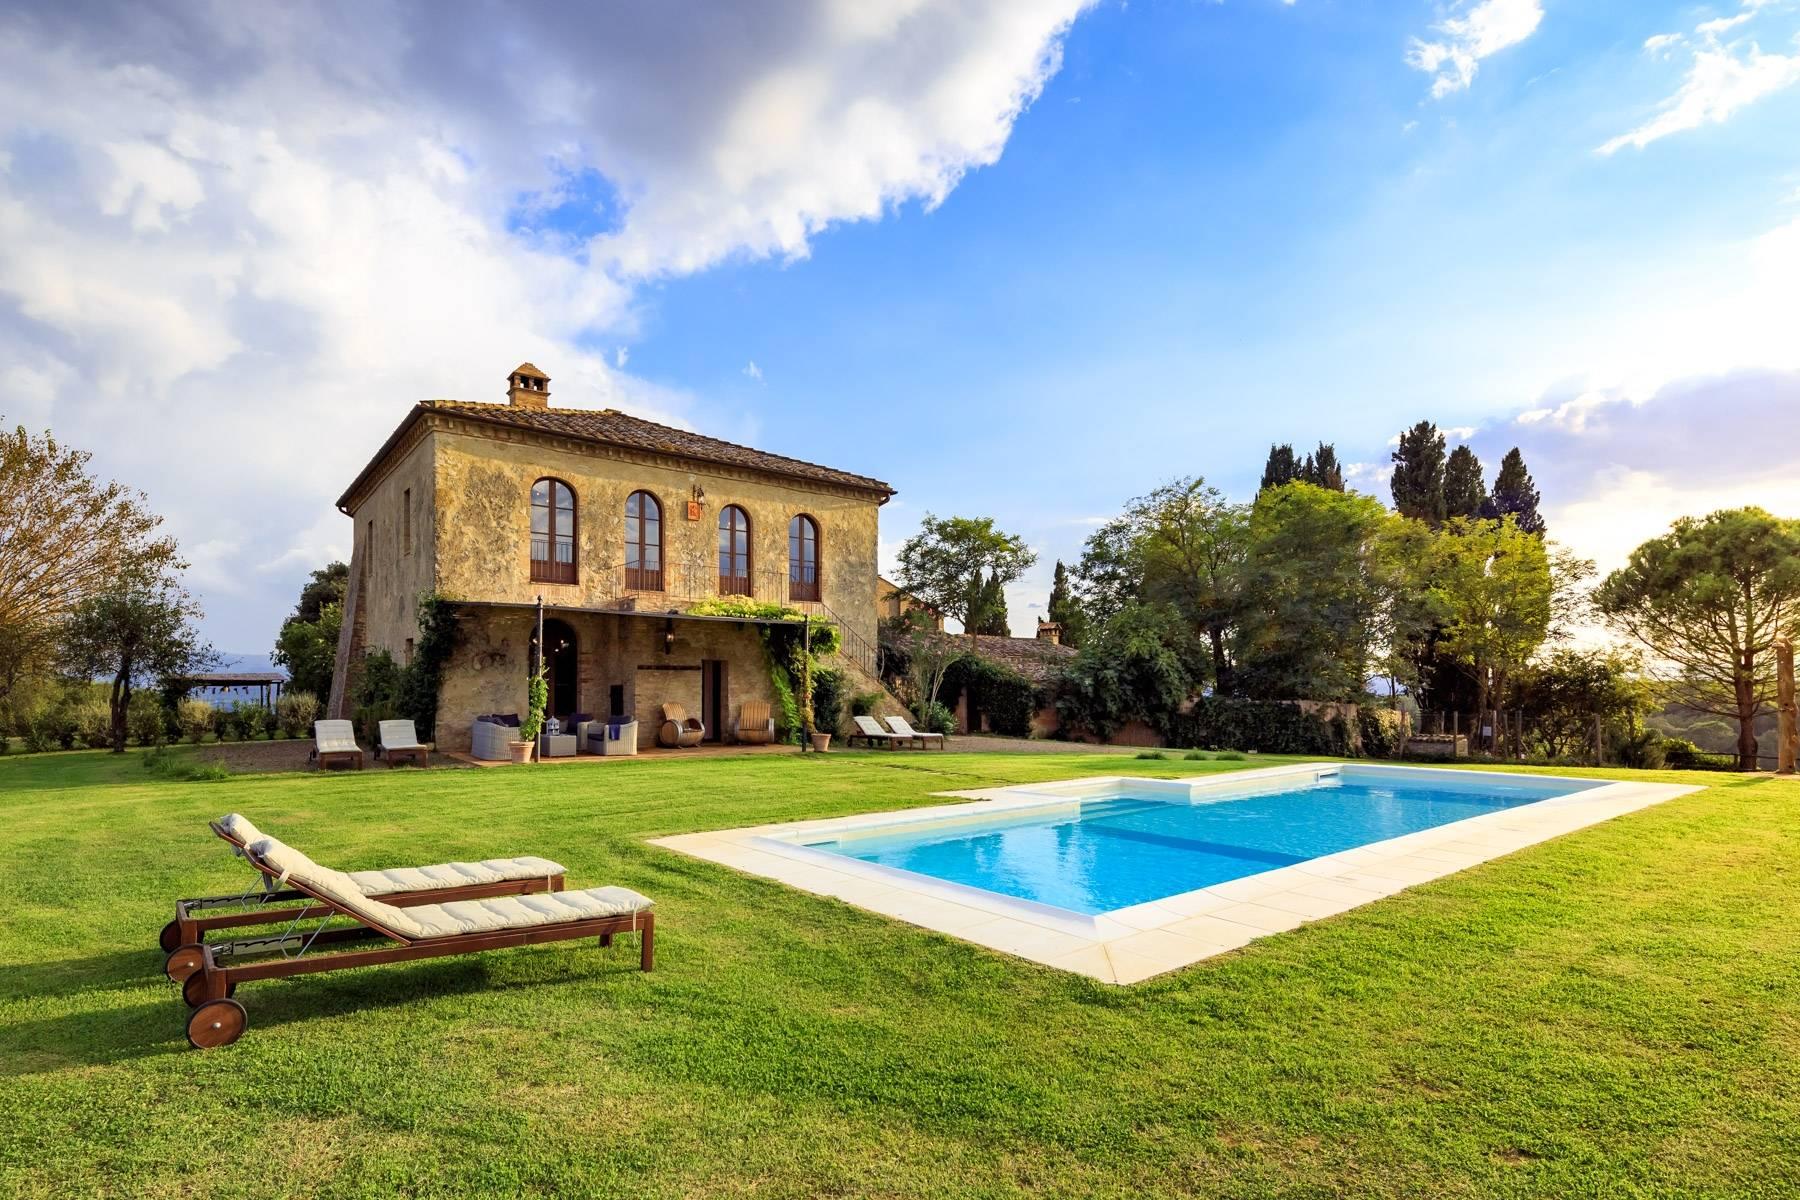 A charming estate in the picturesque Tuscan countryside - 1